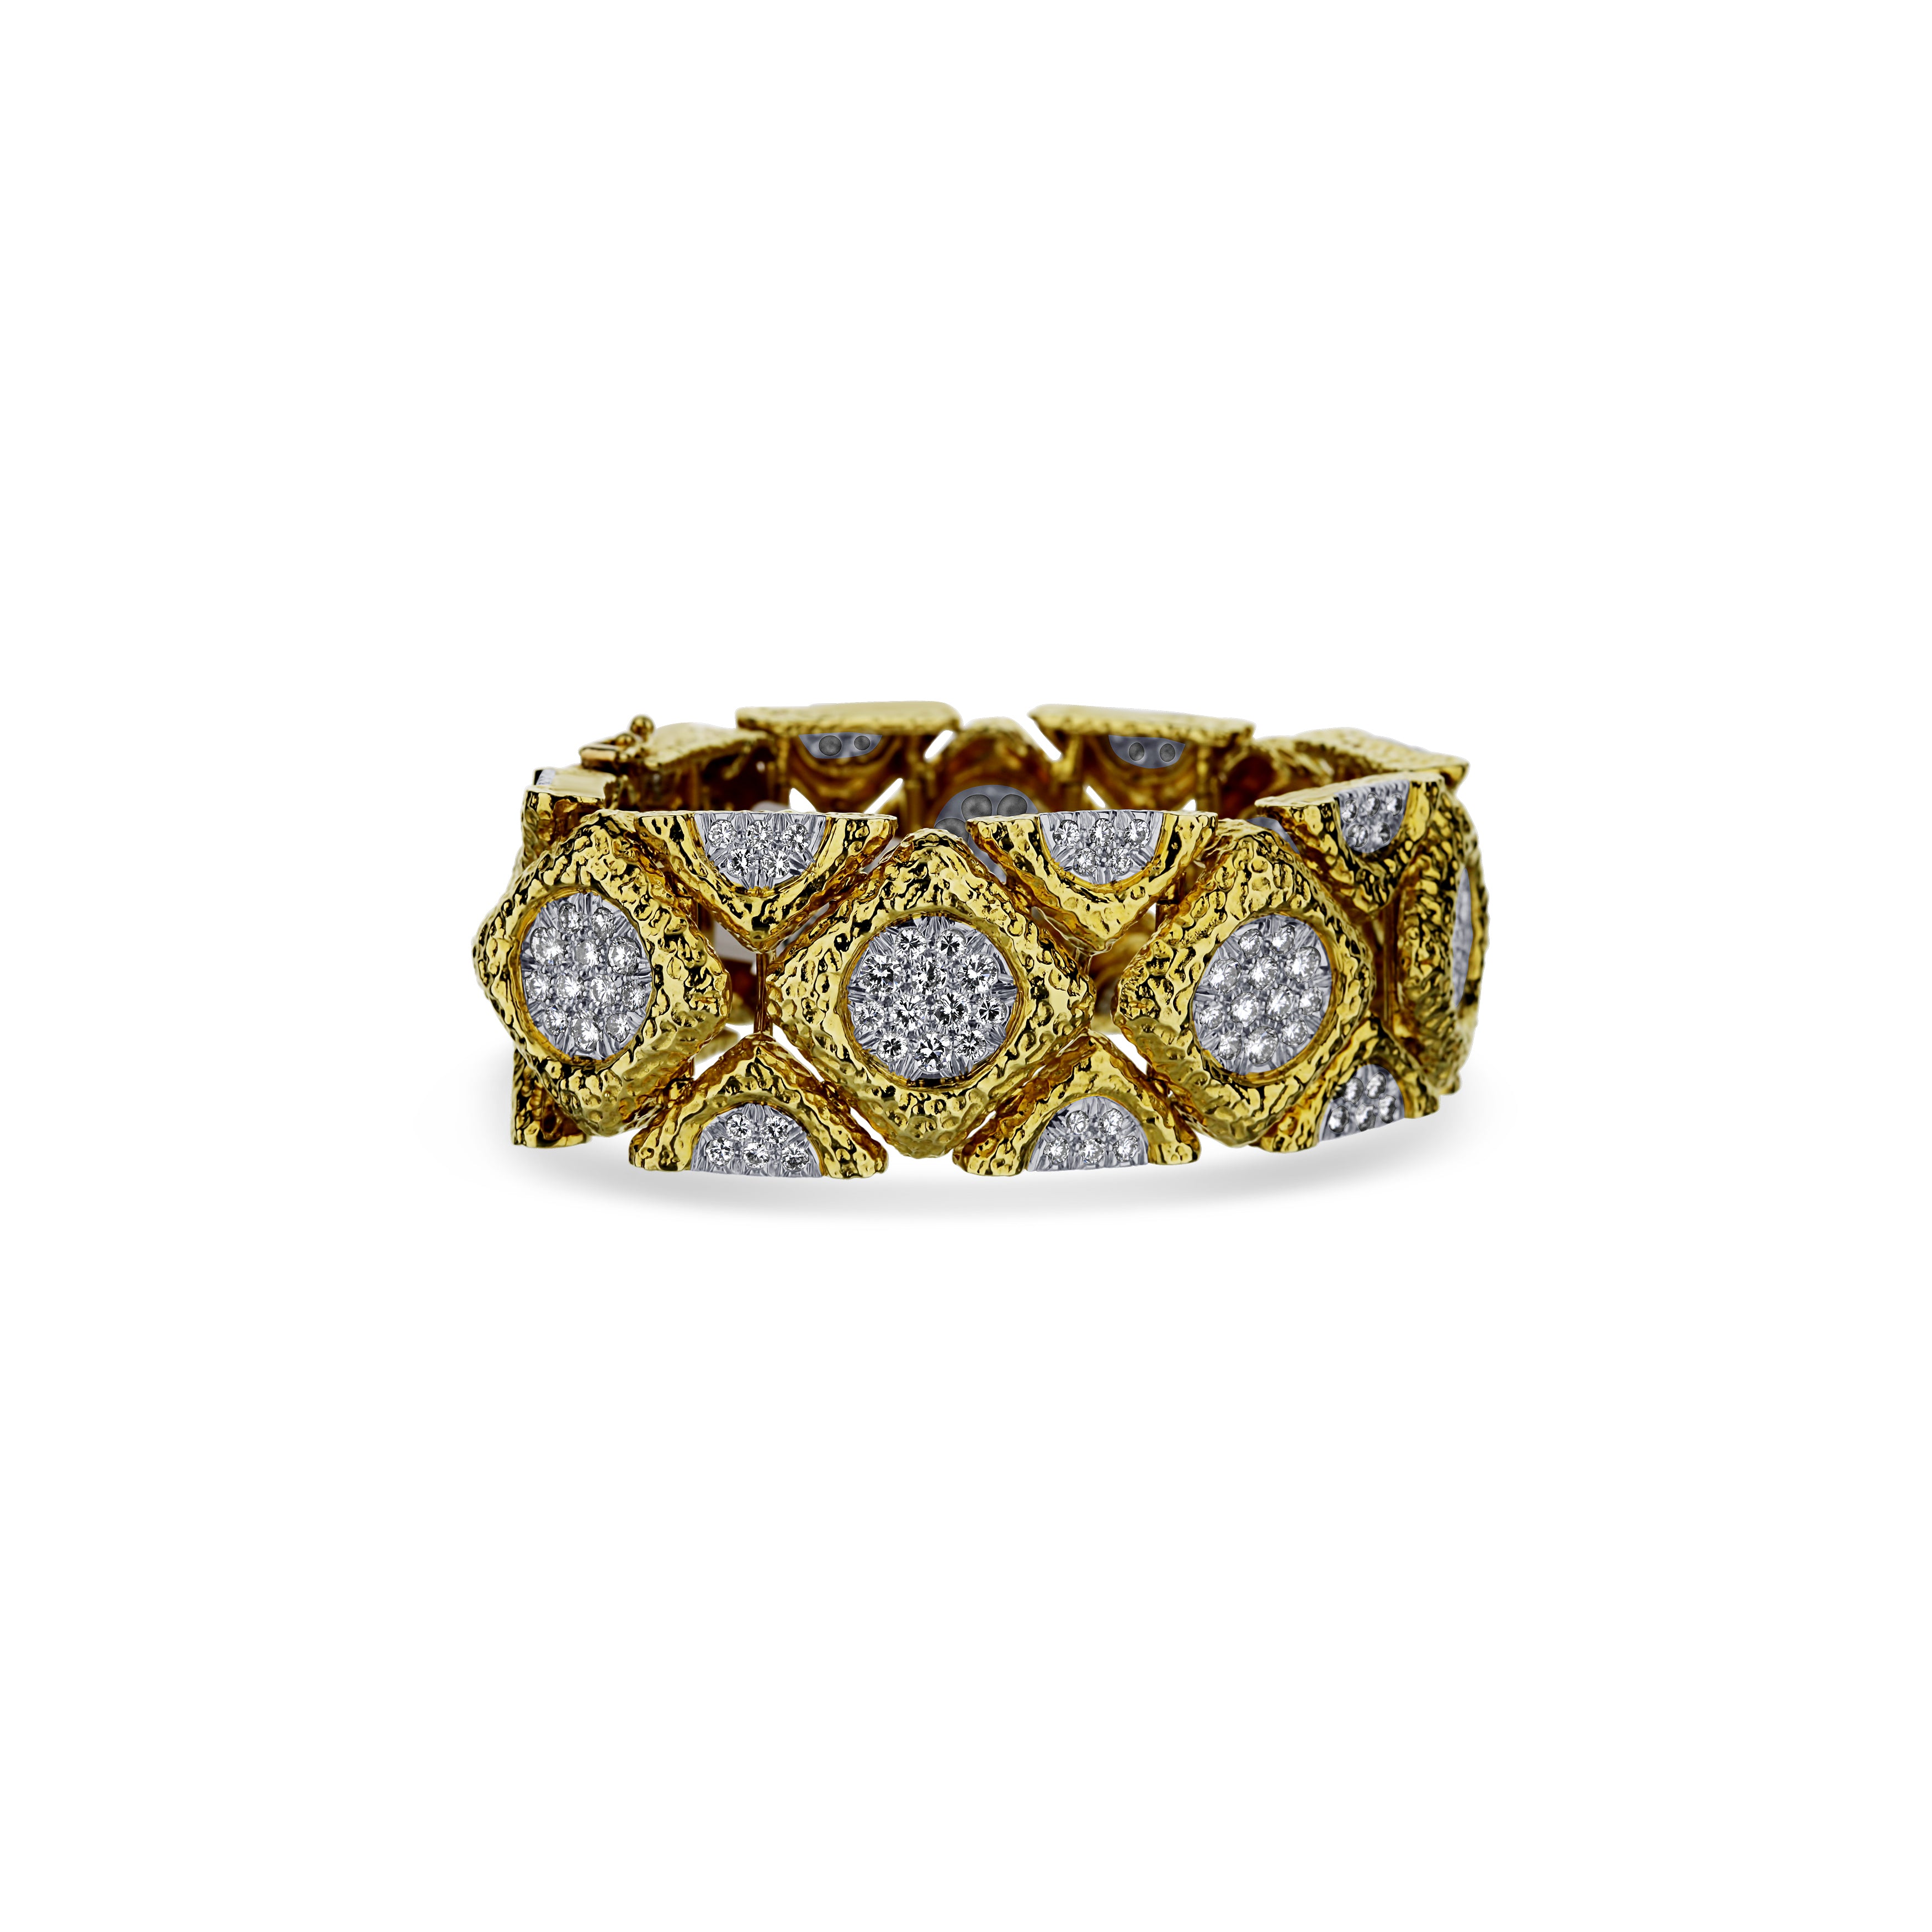 18K Yellow Gold Bracelet With 18K White Gold Pave Circles